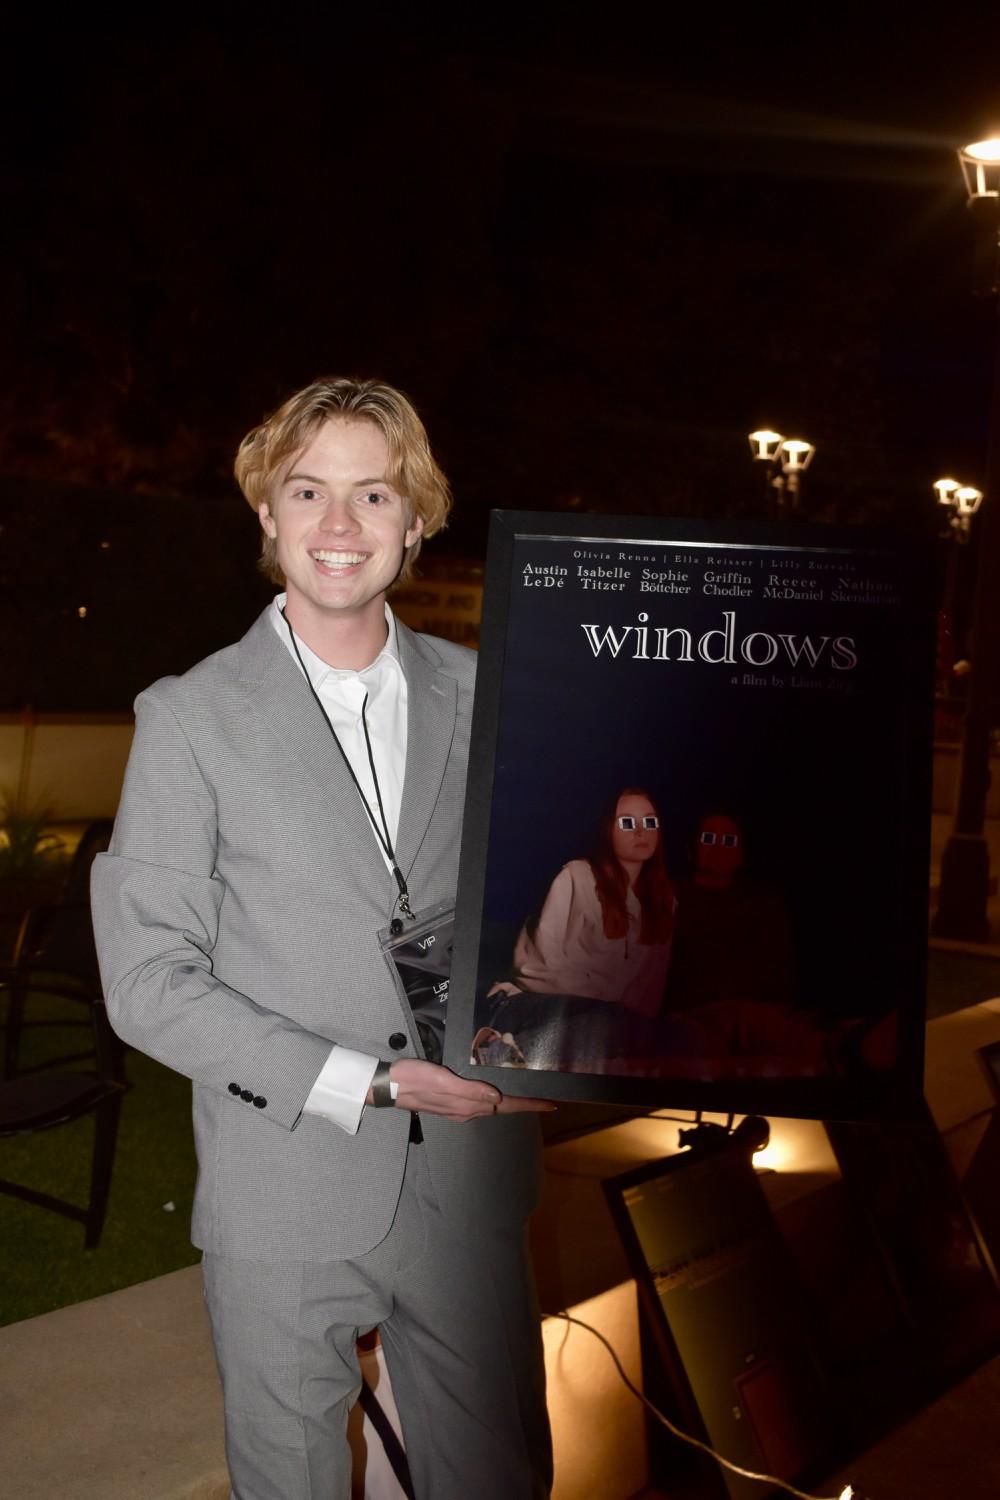 Junior Liam Zieg, assistant photo editor for the Graphic, holds the poster for his short film "Windows" on Feb. 9, in Upper Mullin Town Square. Zieg was the director, writer, cinematographer and editor of the film.